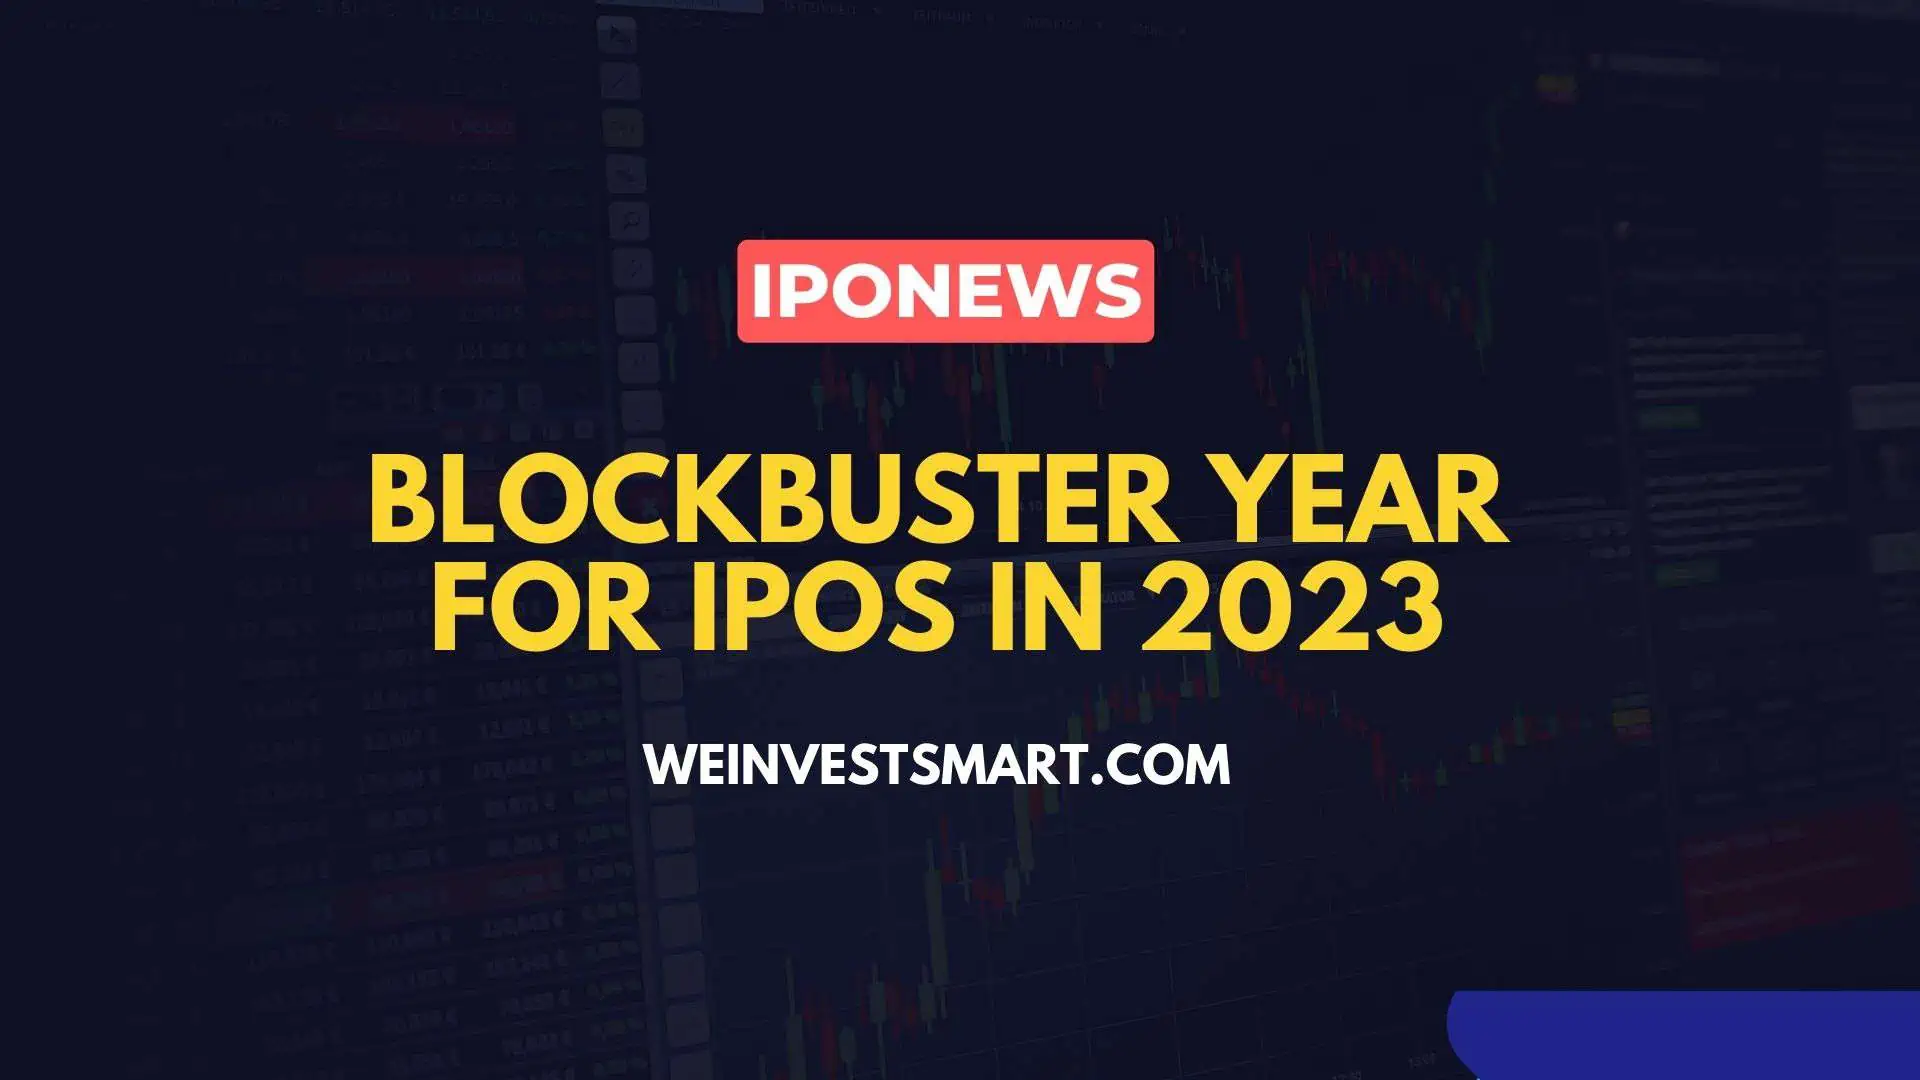 Blockbuster year for IPOs Out of 60 stocks, 57 closed higher than the IPO price in 2023